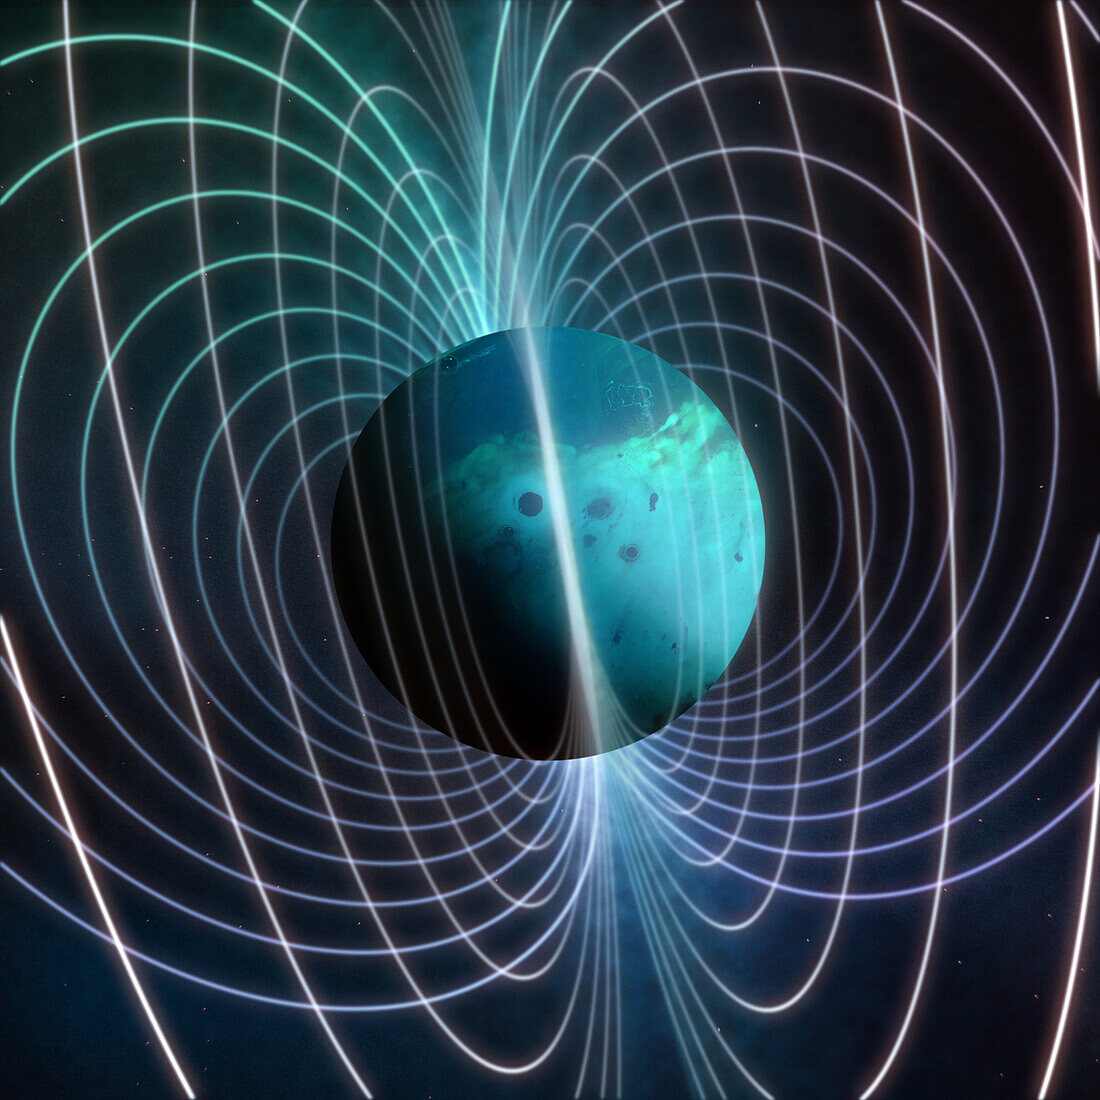 Mini-Neptune with magnetic field lines, composite image